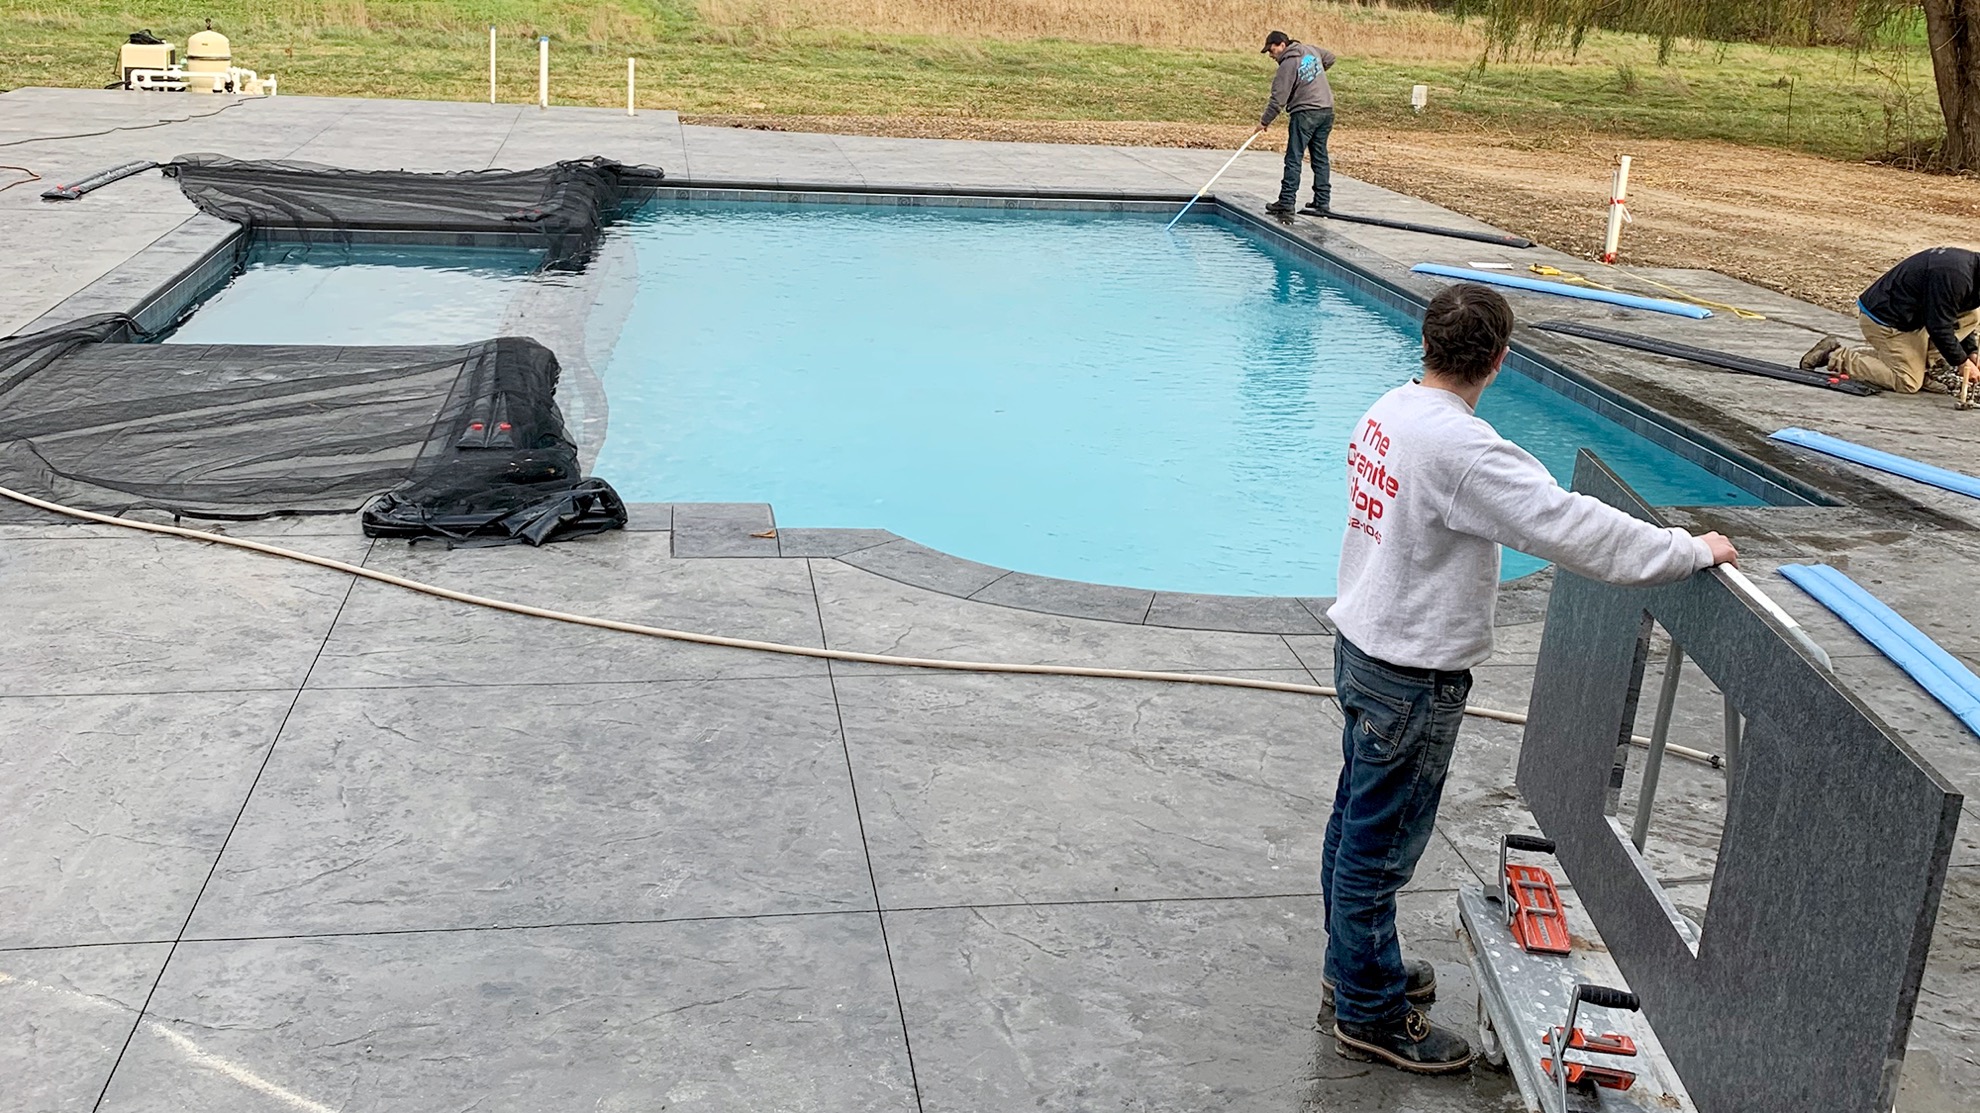 Pool maintenance services provided by Chameleon Pools in Wheatfield, NY.